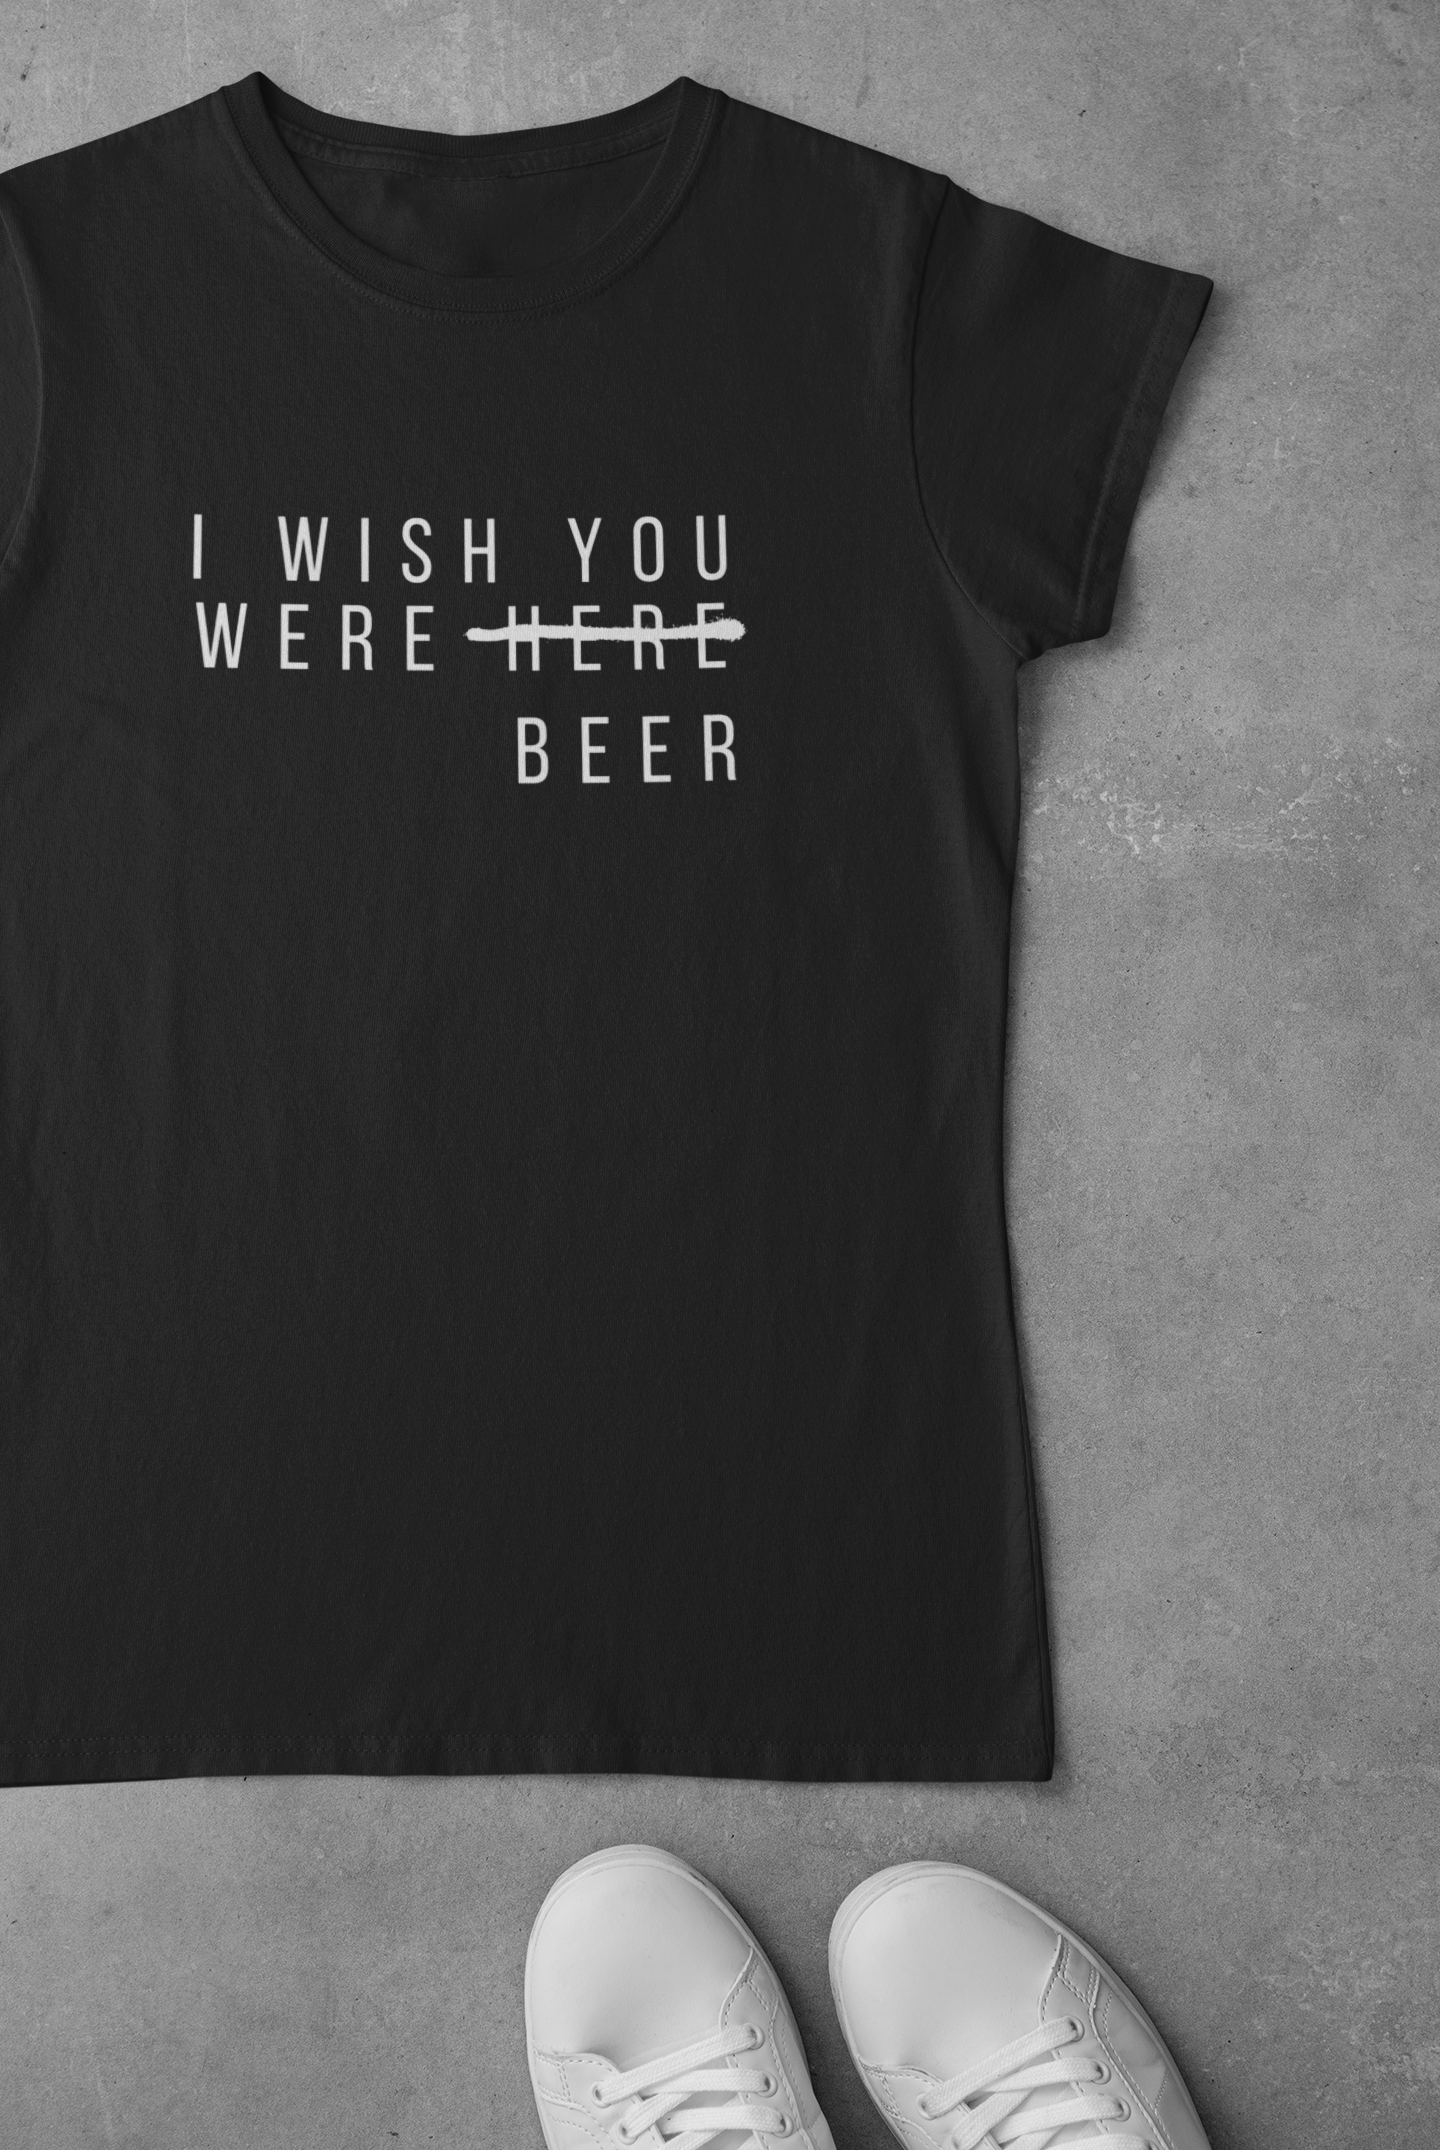 Woman - Wish you were (Here) Beer - Funny Obnoxious Shirt